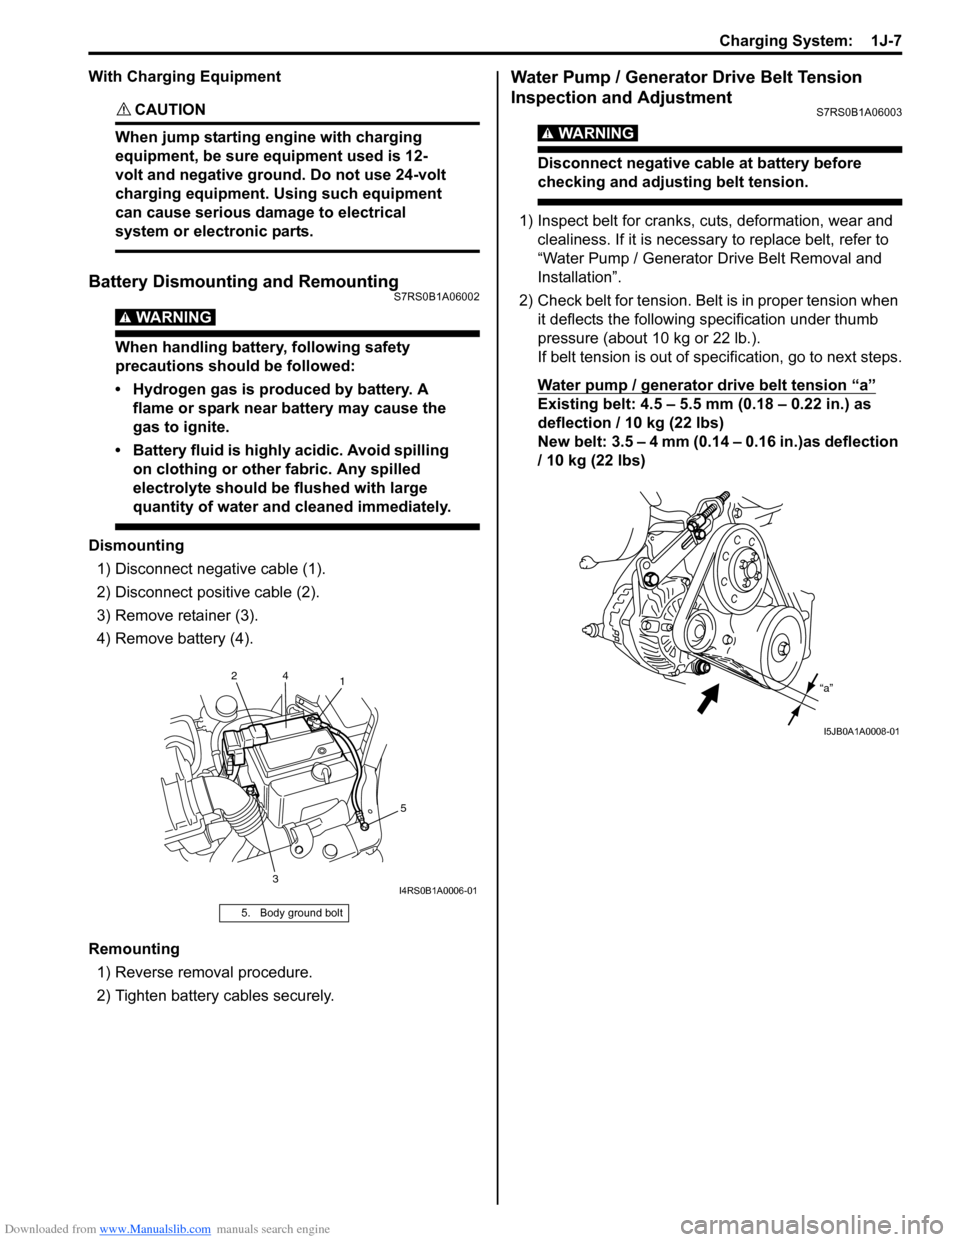 SUZUKI SWIFT 2006 2.G Service Owners Manual Downloaded from www.Manualslib.com manuals search engine Charging System:  1J-7
With Charging Equipment
CAUTION! 
When jump starting engine with charging 
equipment, be sure equipment used is 12-
volt